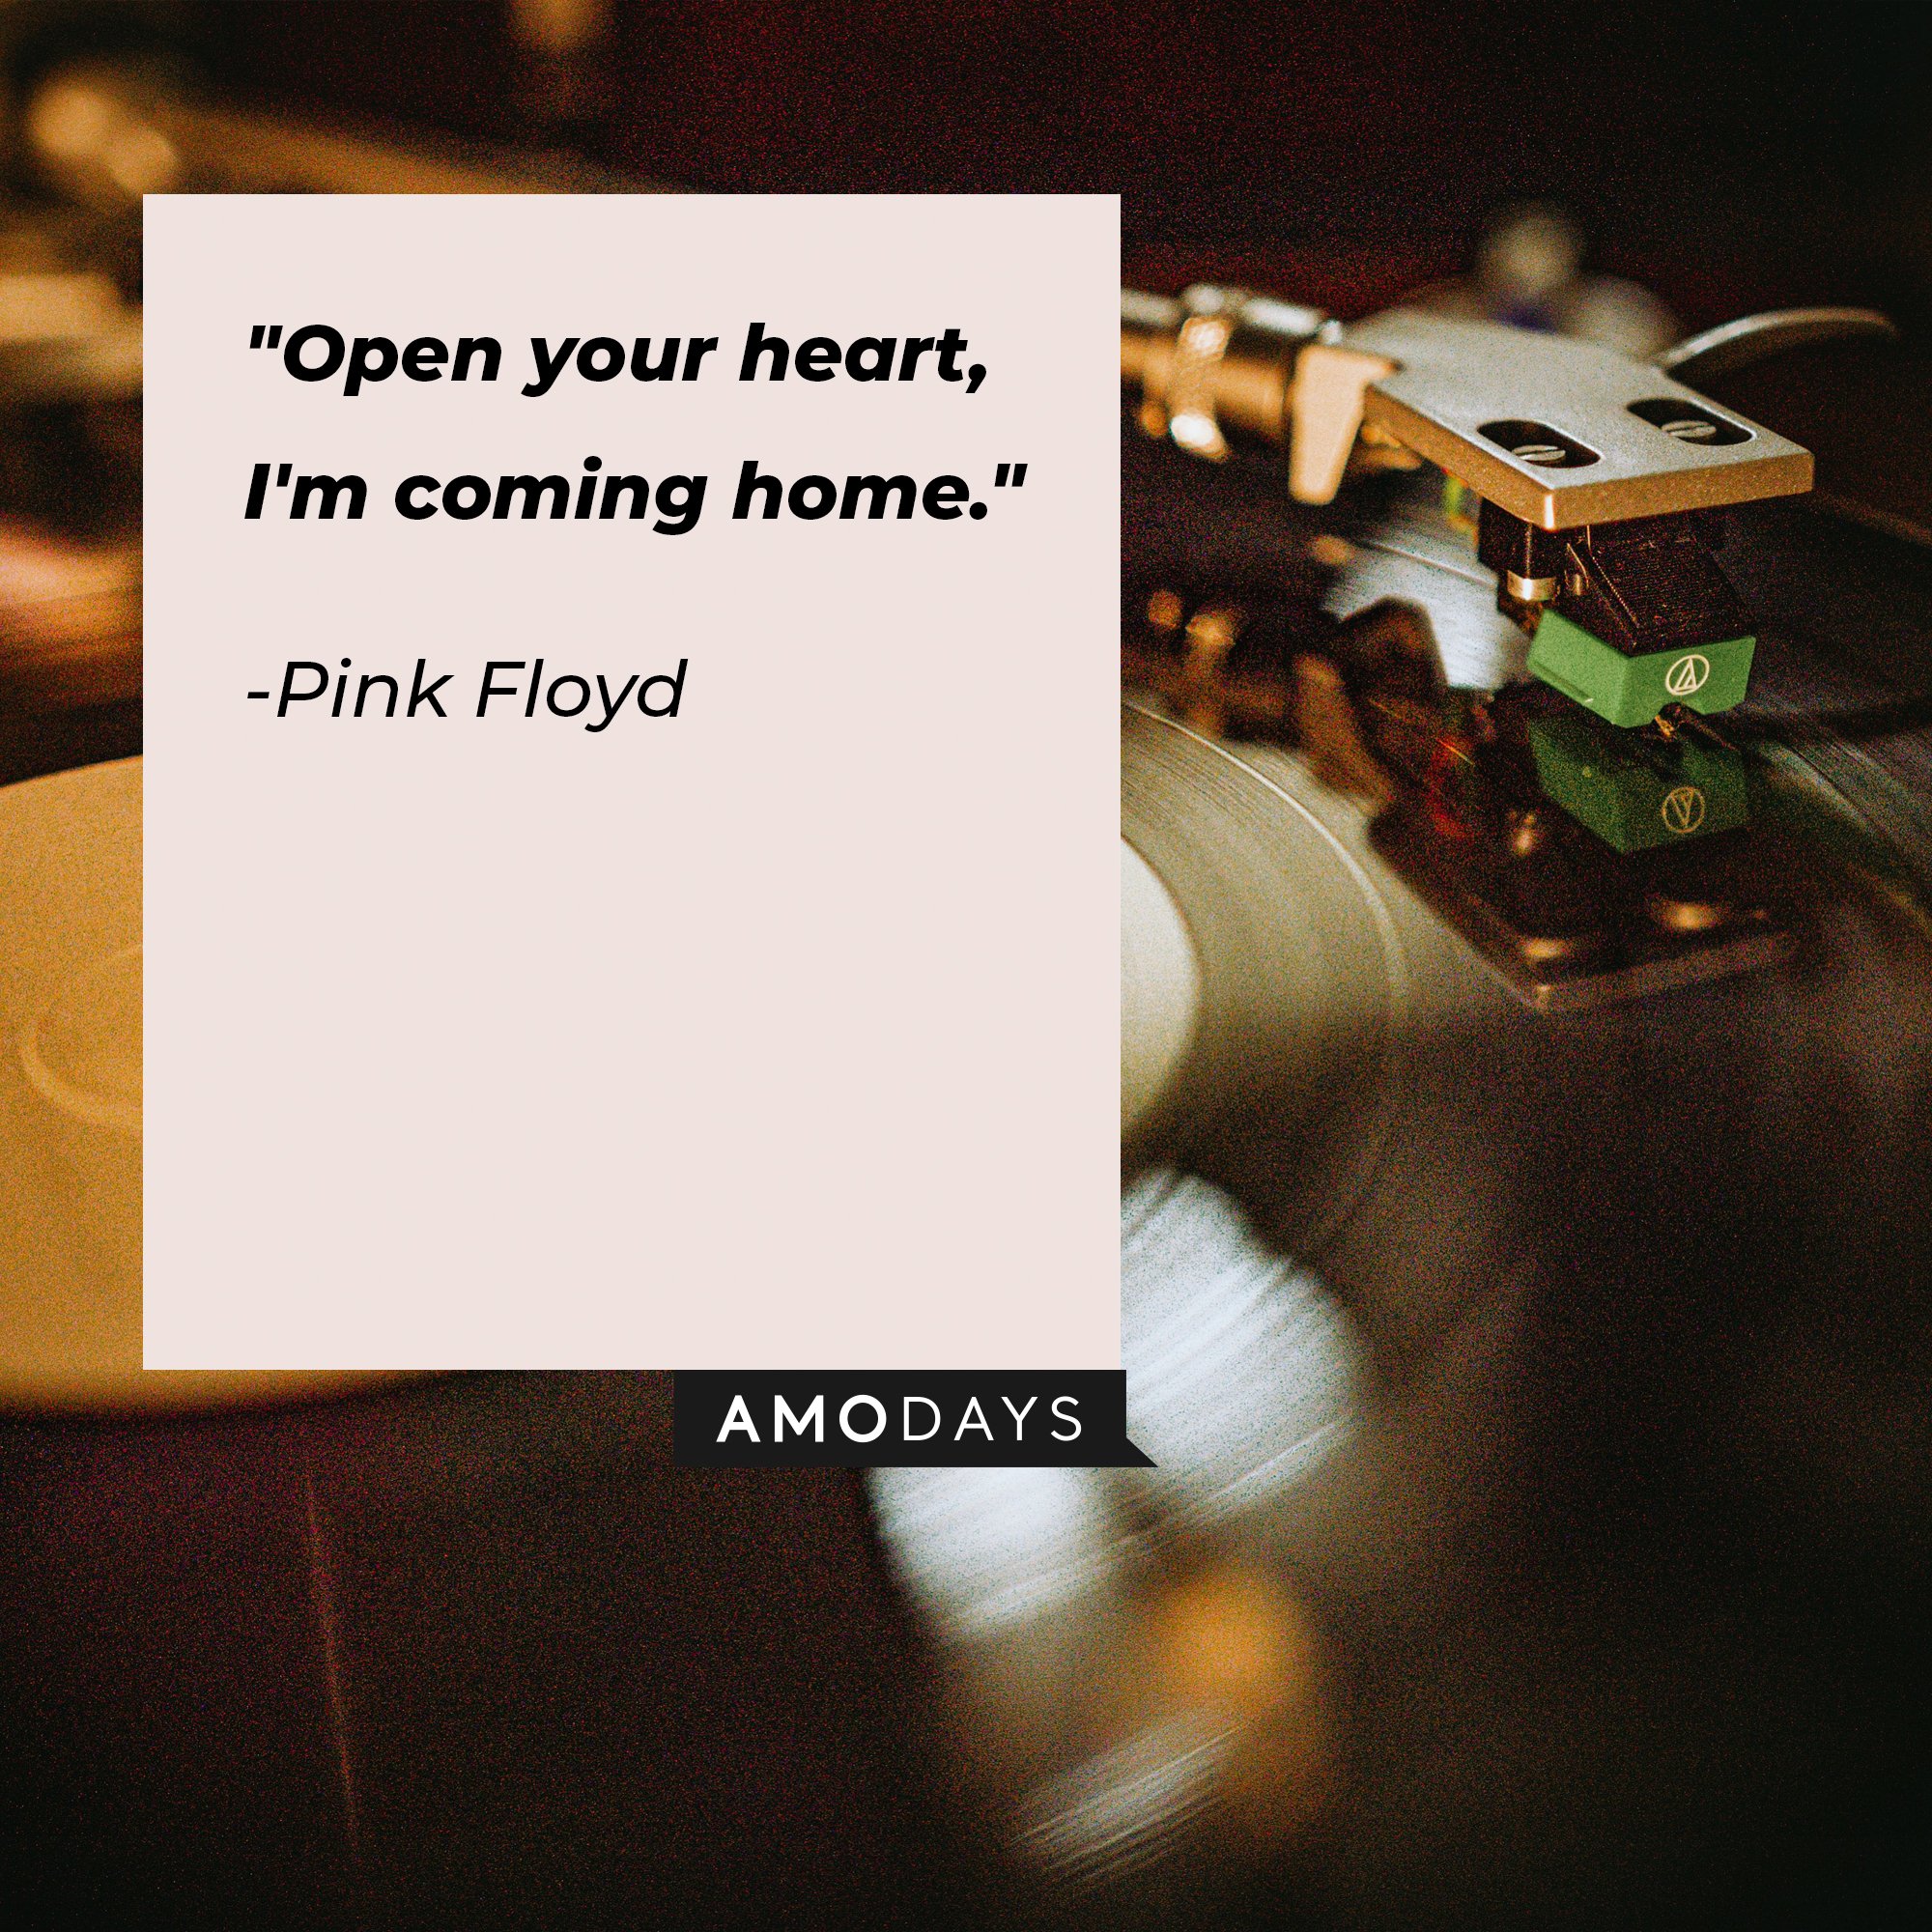 Pink Floyd's quote: "Open your heart, I'm coming home." | Image: AmoDays